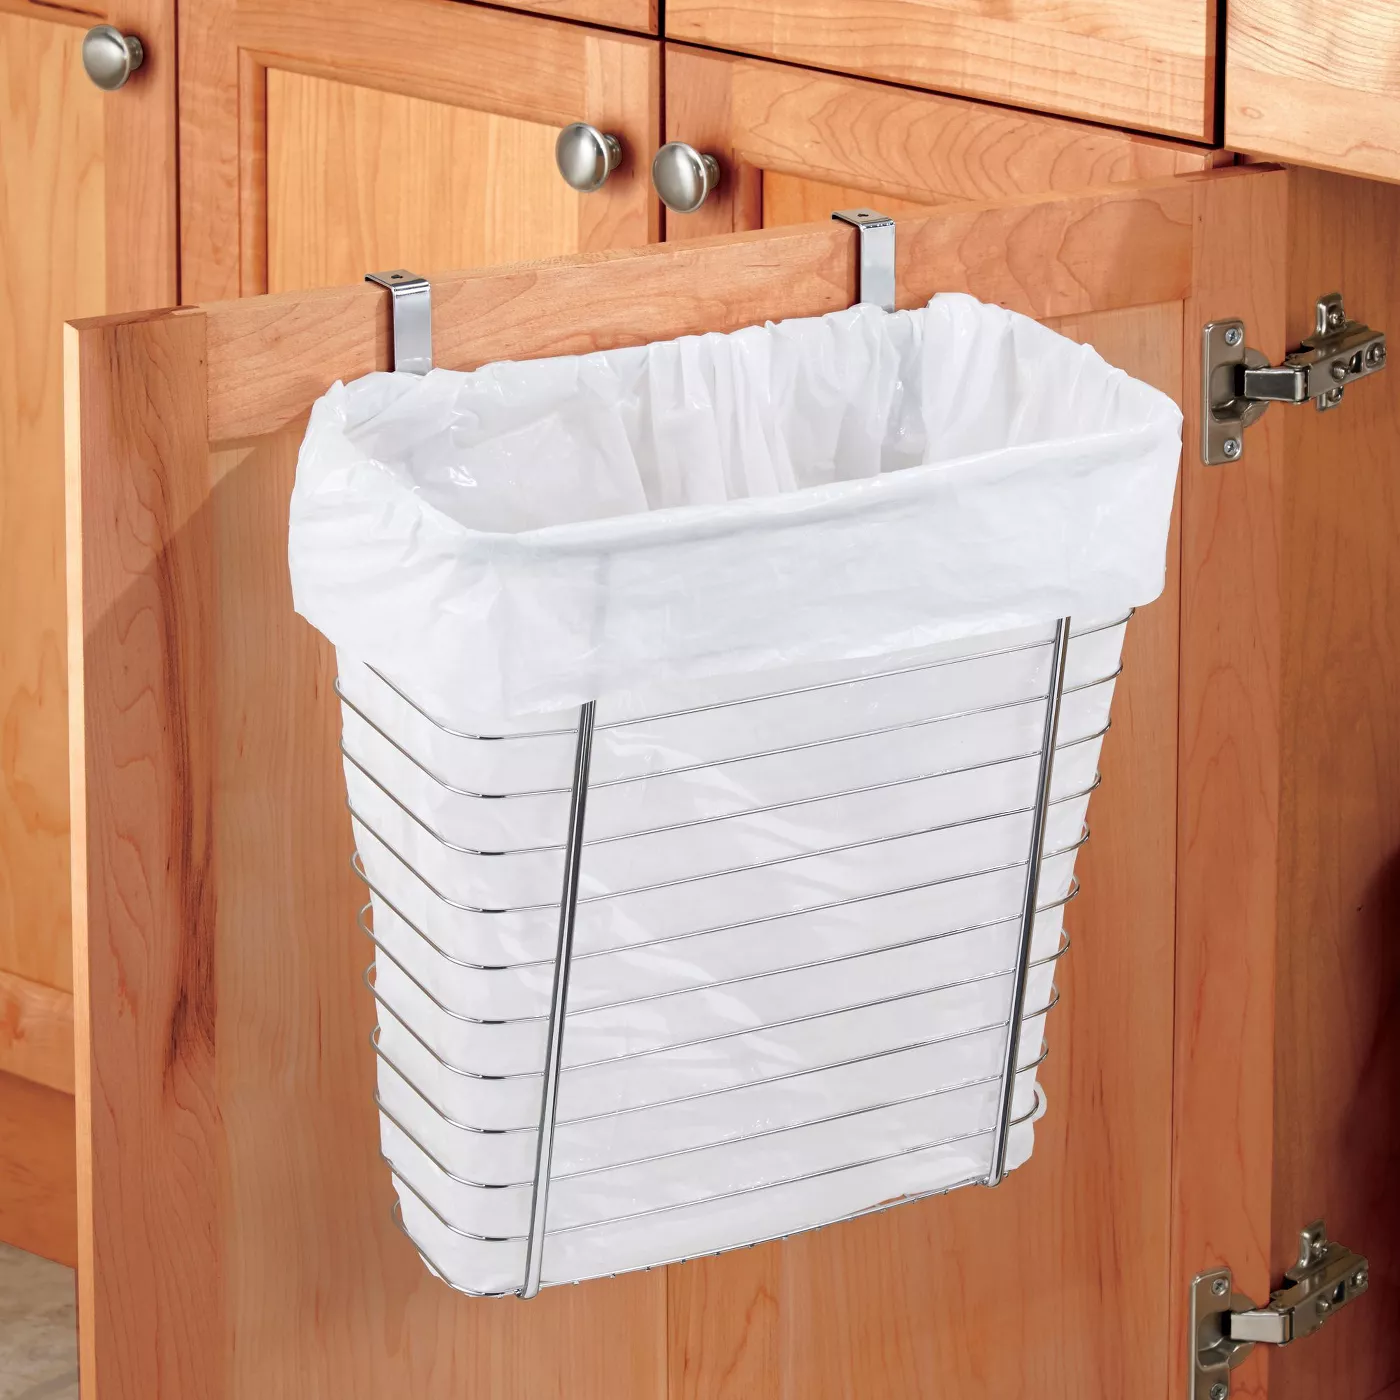 InterDesign Axis Over-the-Cabinet Steel Wastebasket - image 3 of 5